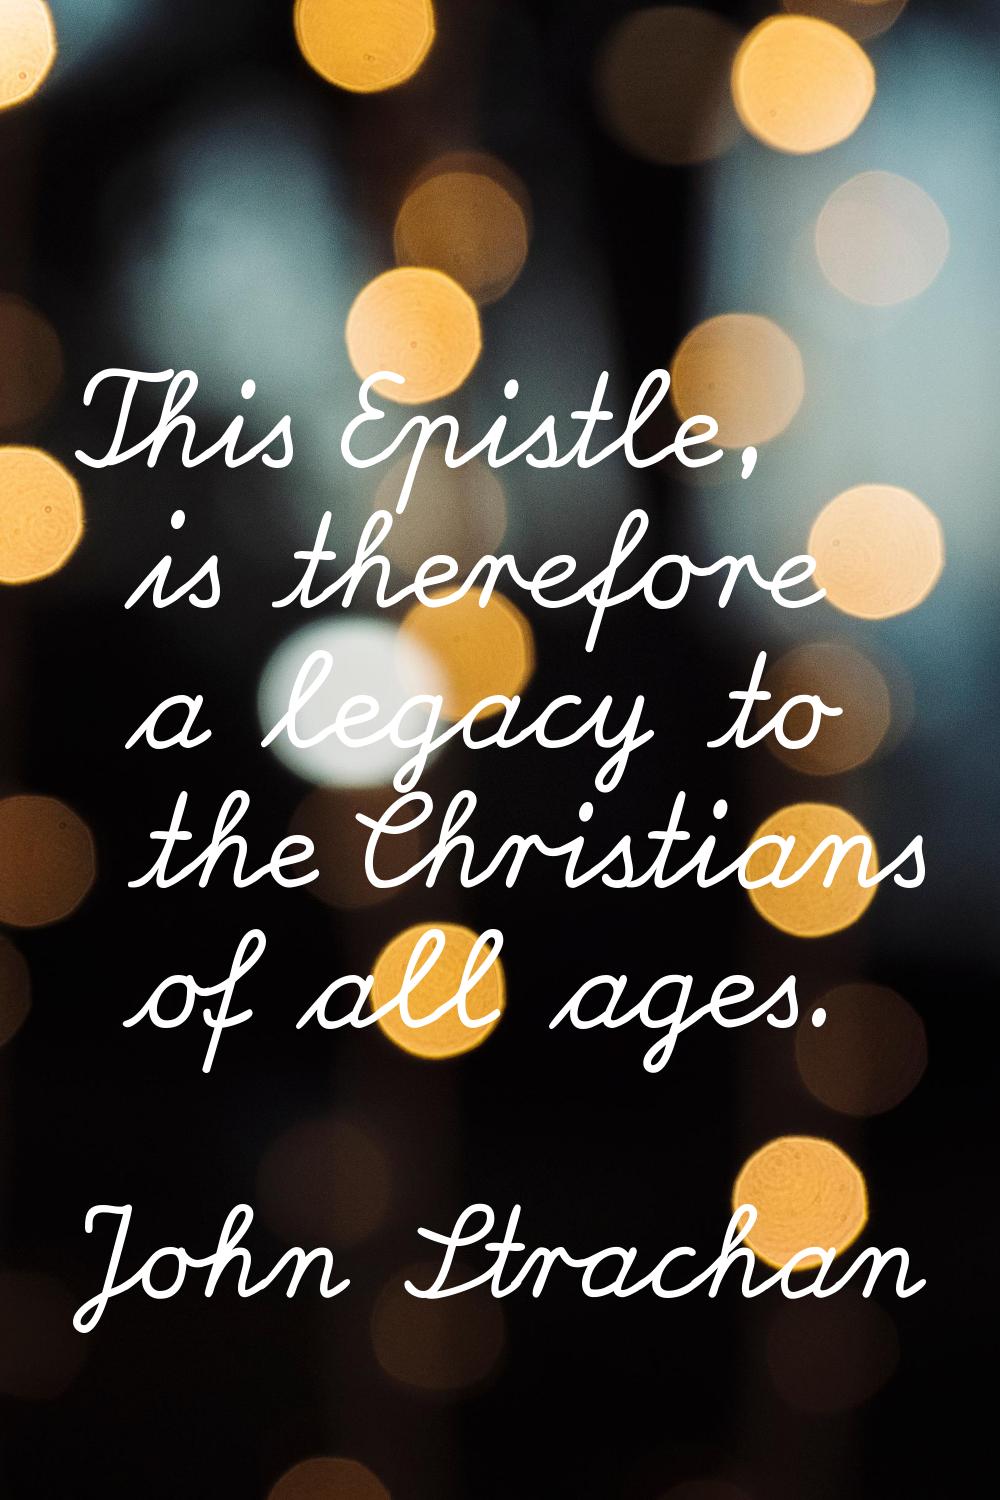 This Epistle, is therefore a legacy to the Christians of all ages.